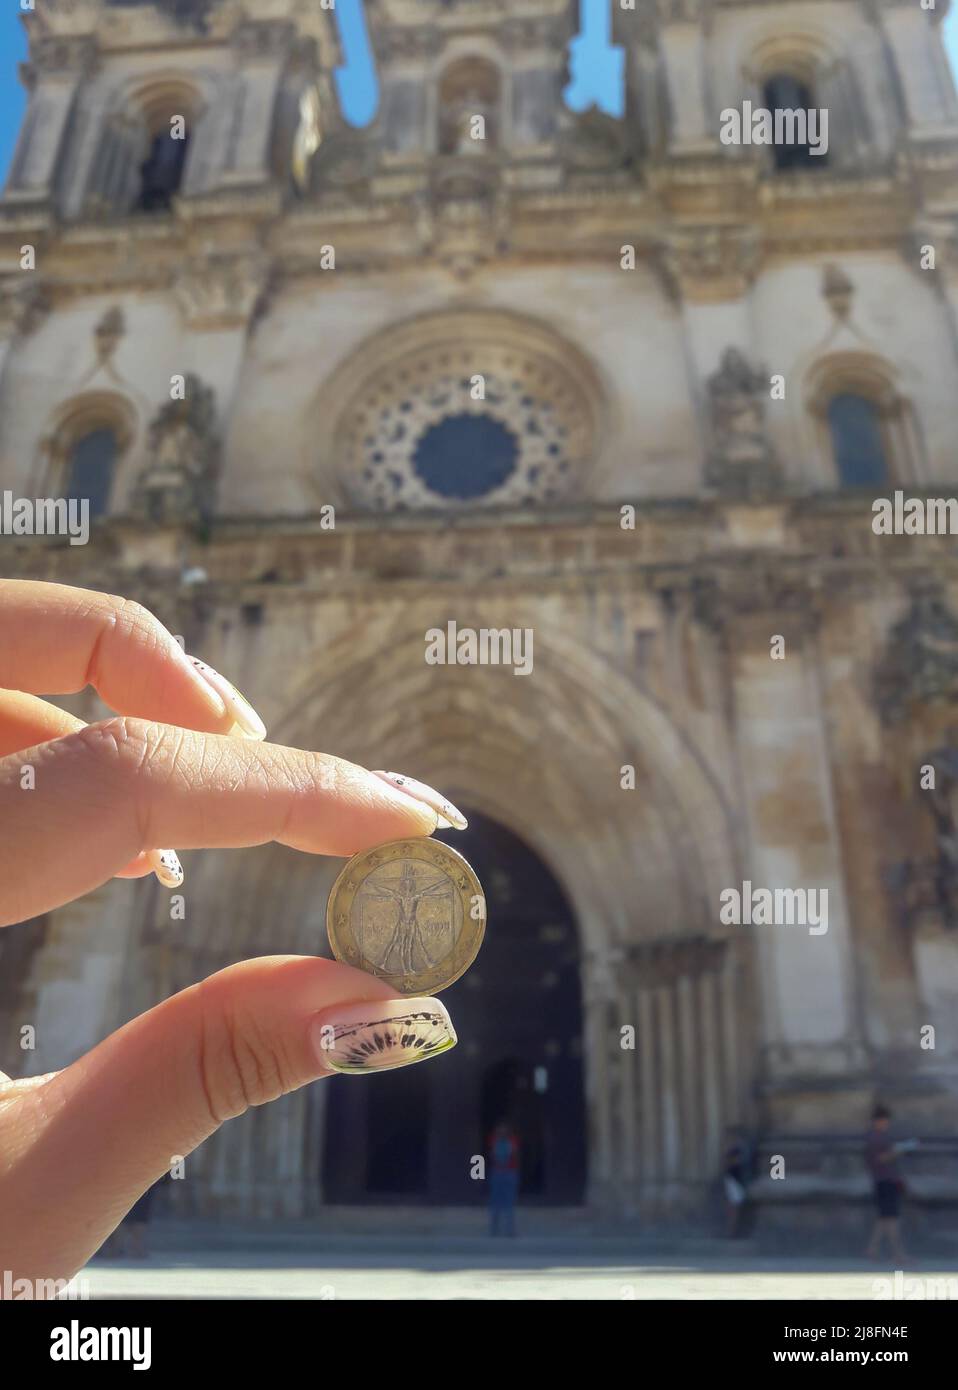 hand holding a coin with image of Vitruvian Man on the background of an old building Stock Photo